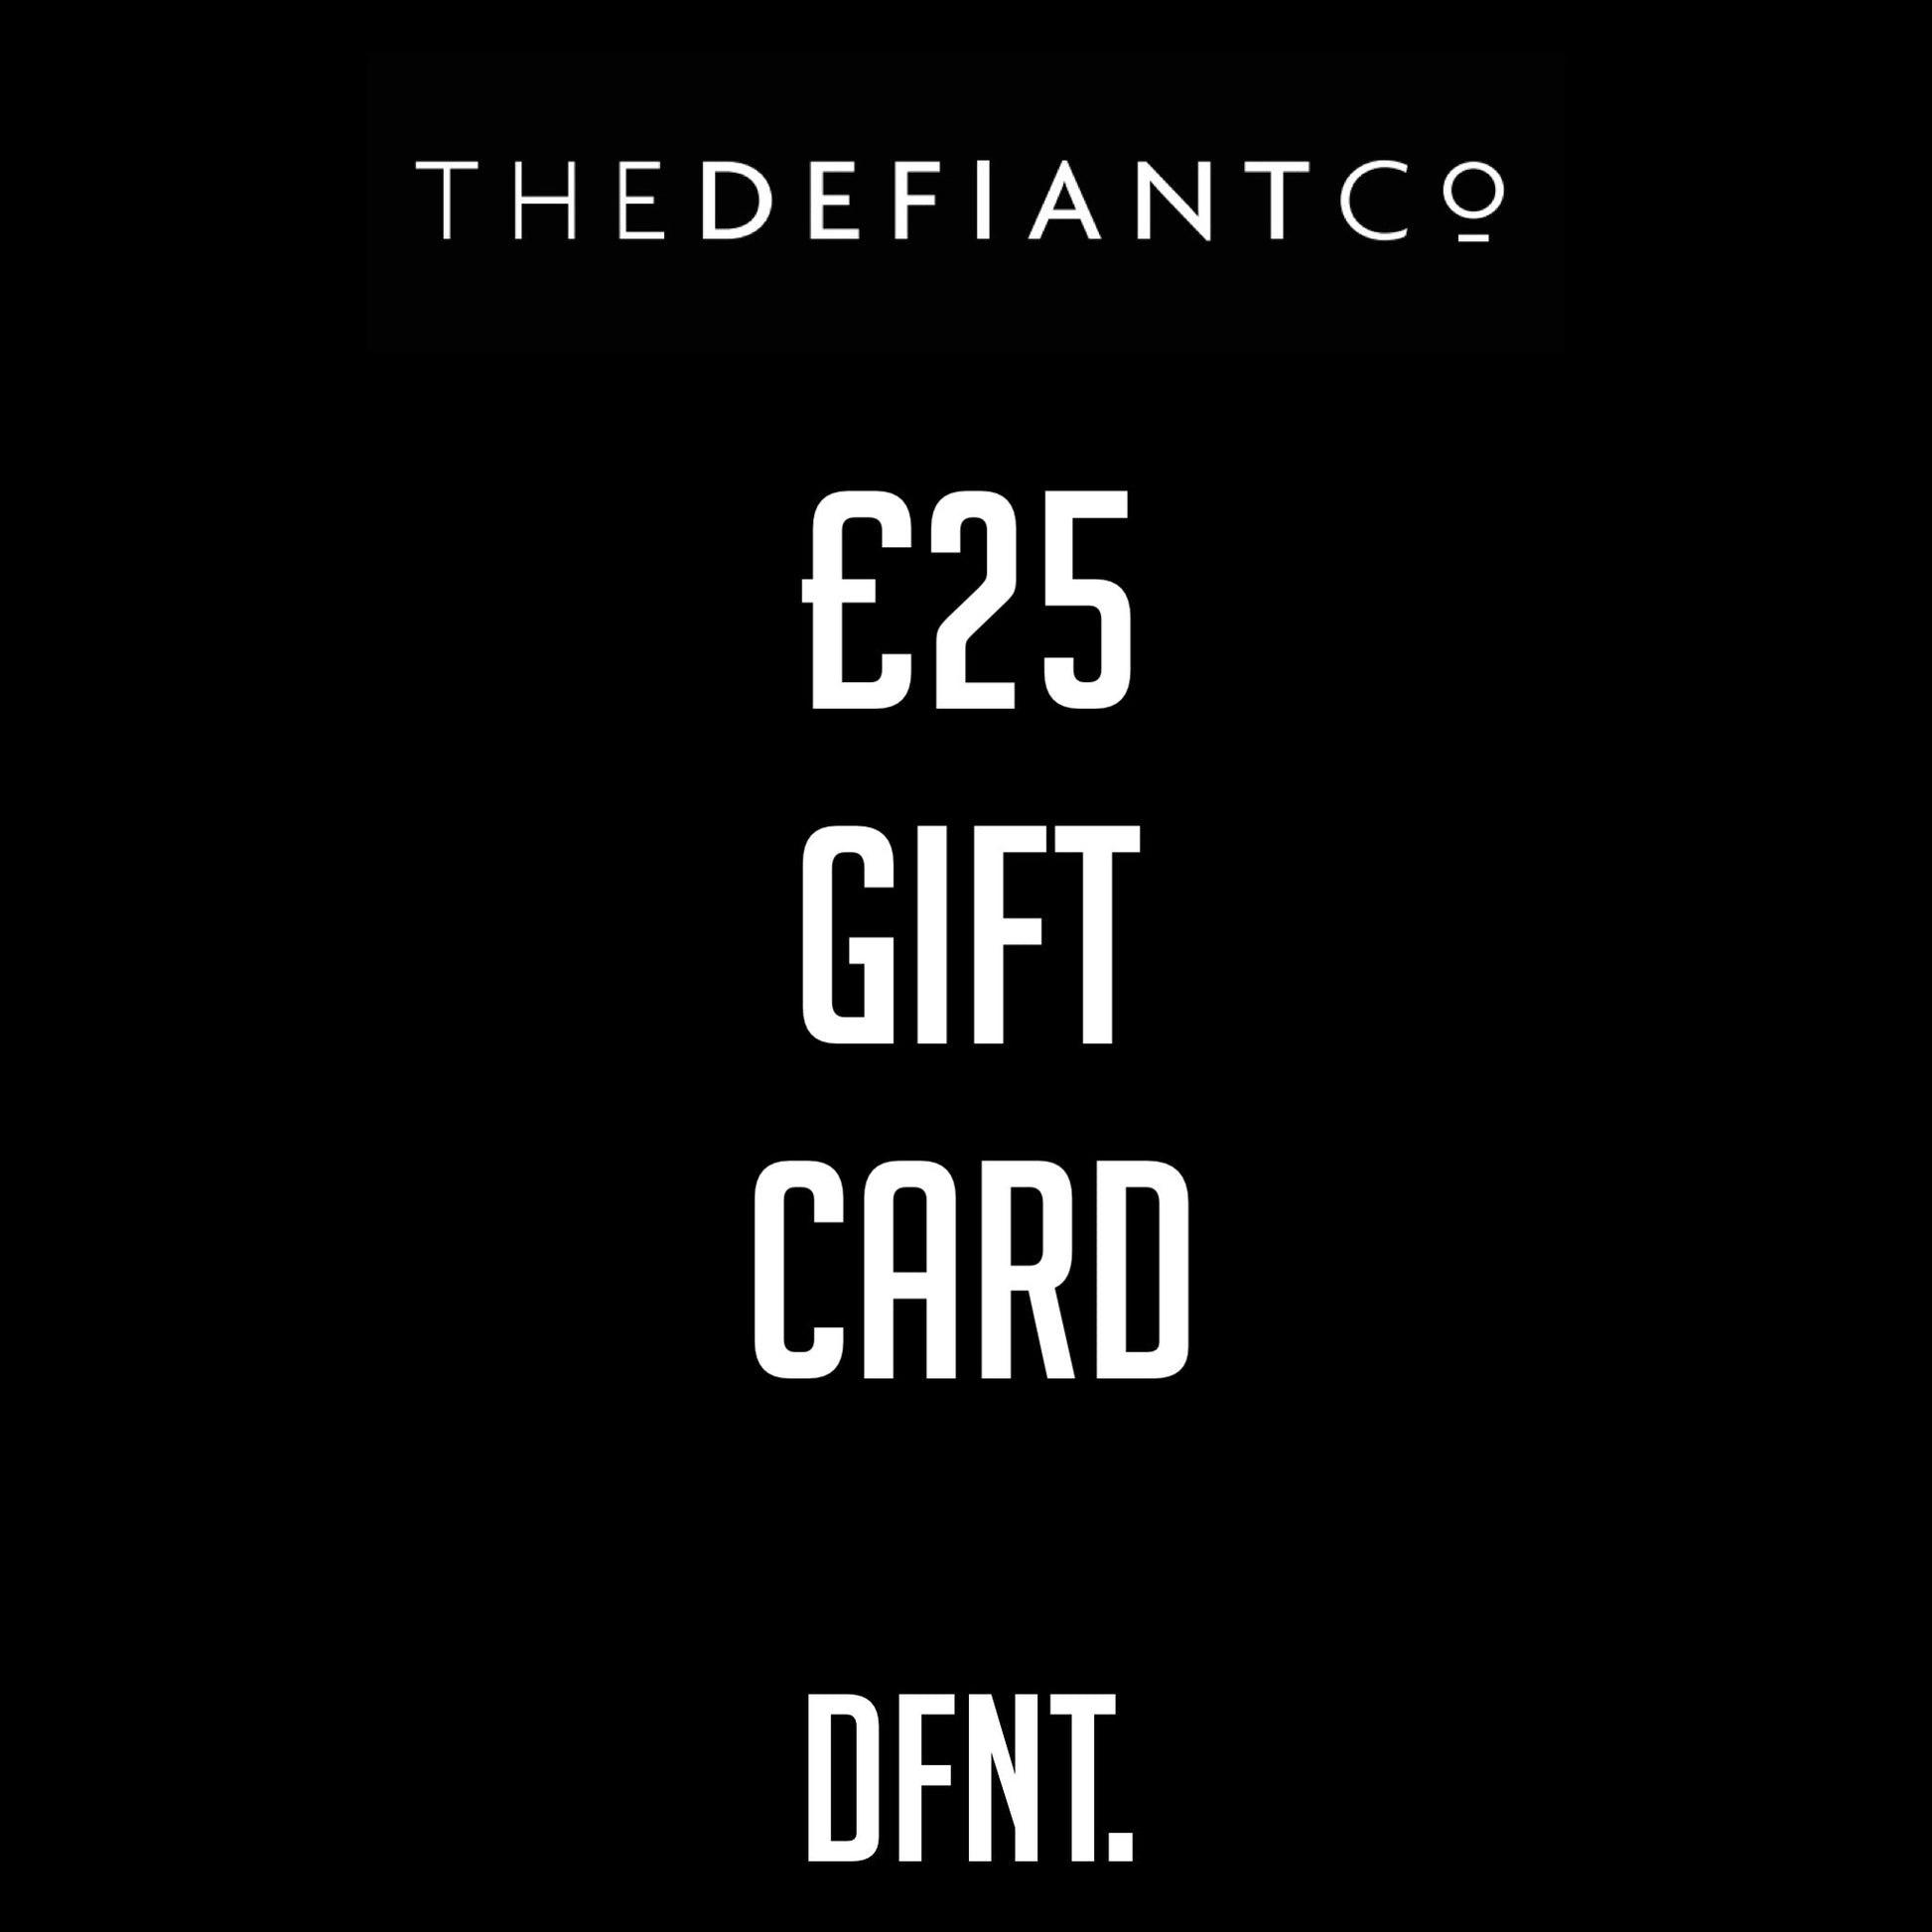 A photo of The Defiant co Gift Card.  The gift card shows both The Defiant Co and DFNT. logos at the top and bottom respectively. Gifts cards are a great gift idea for your friends and family. The centre displays the value of the Gift Card which is £25.